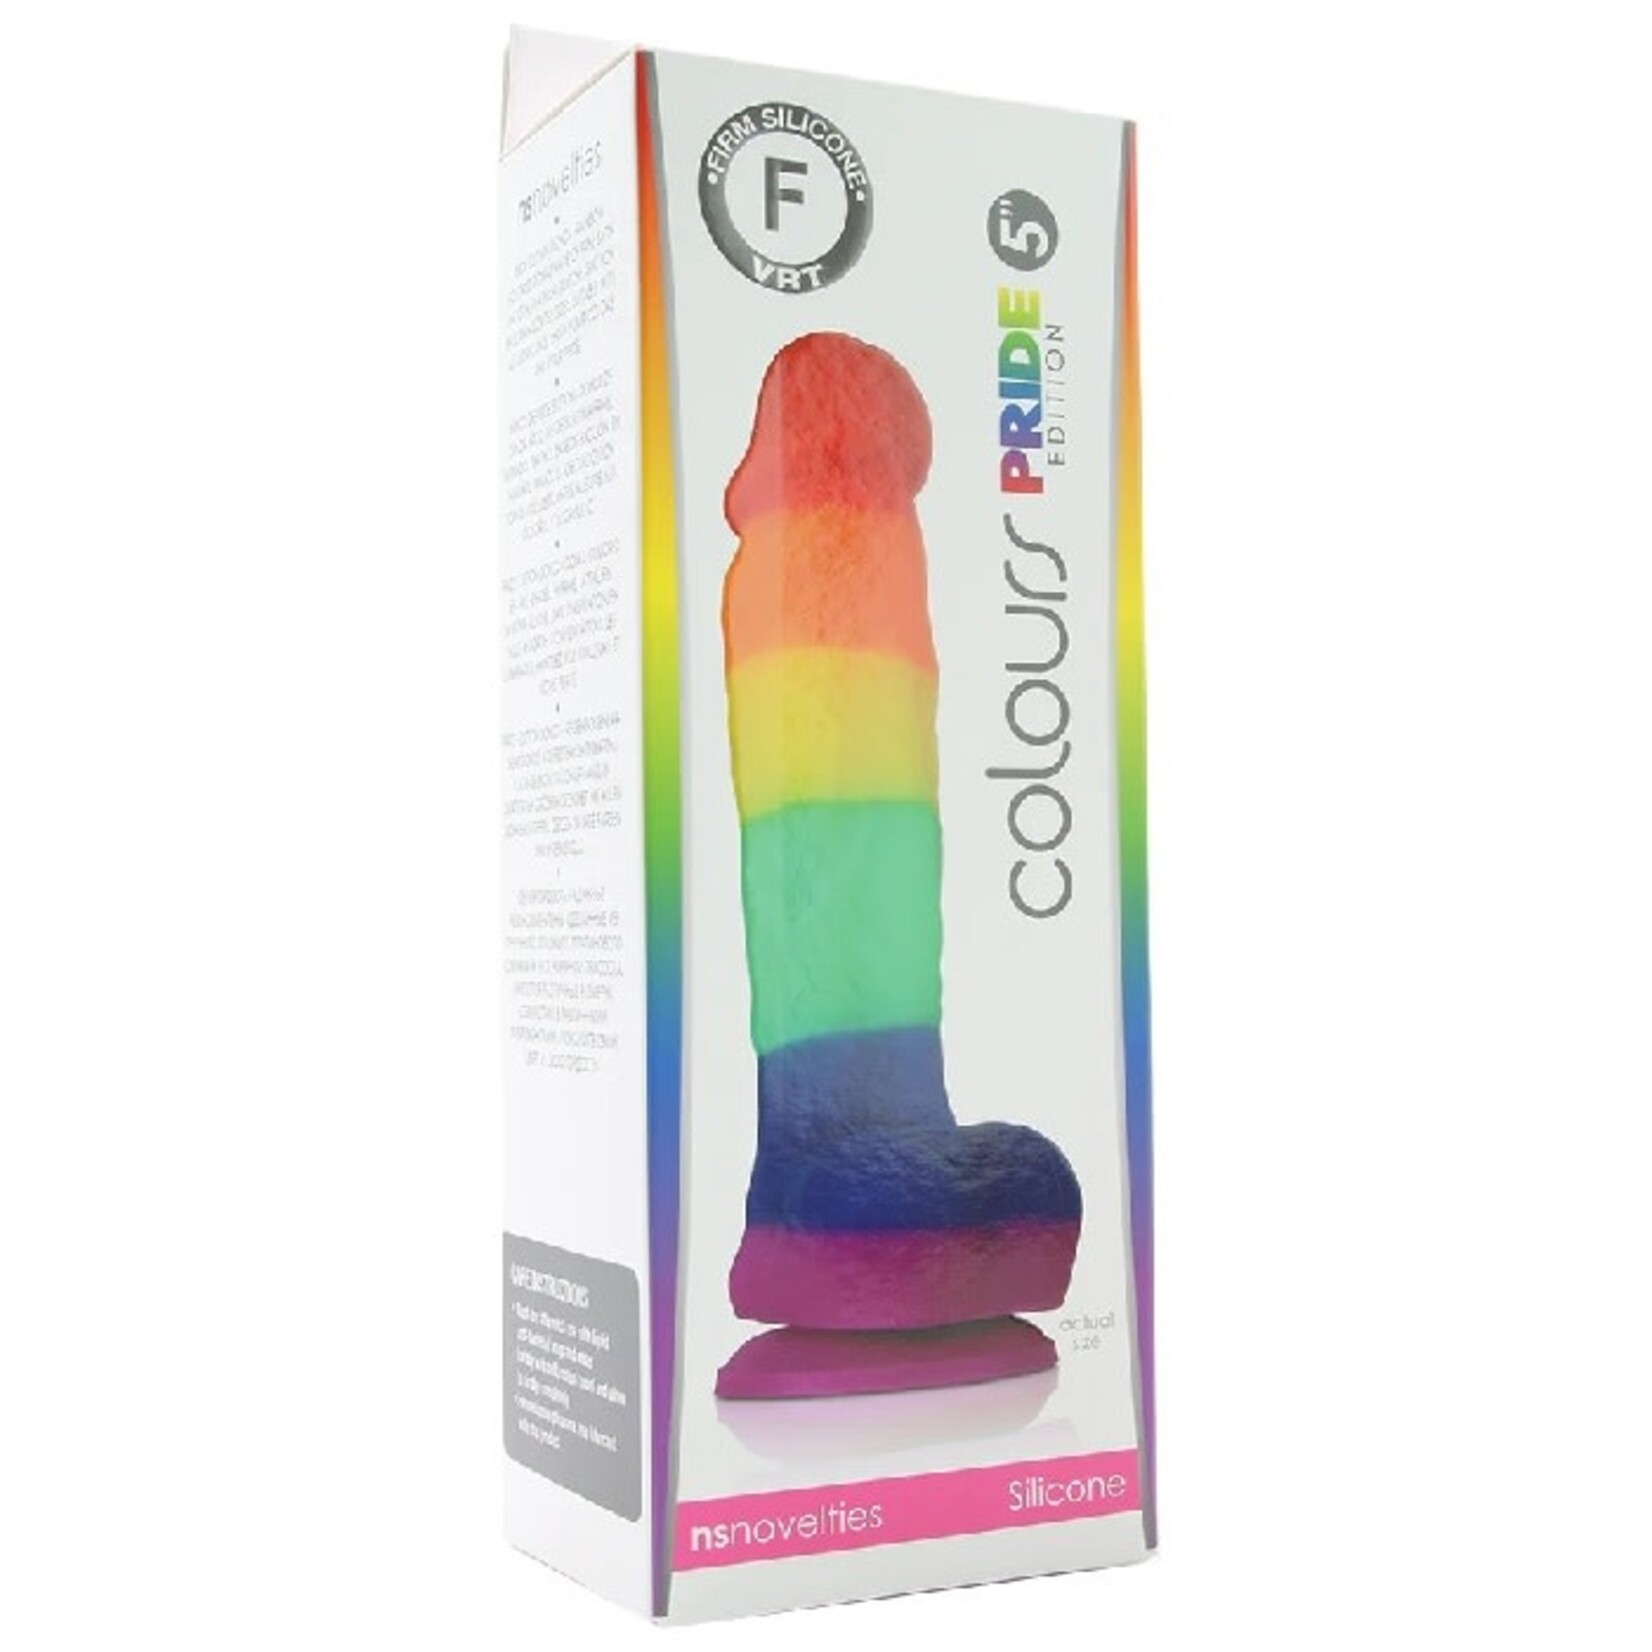 NSNOVELTIES COLOURS PRIDE EDITION 5 INCH SILICONE DILDO IN RAINBOW